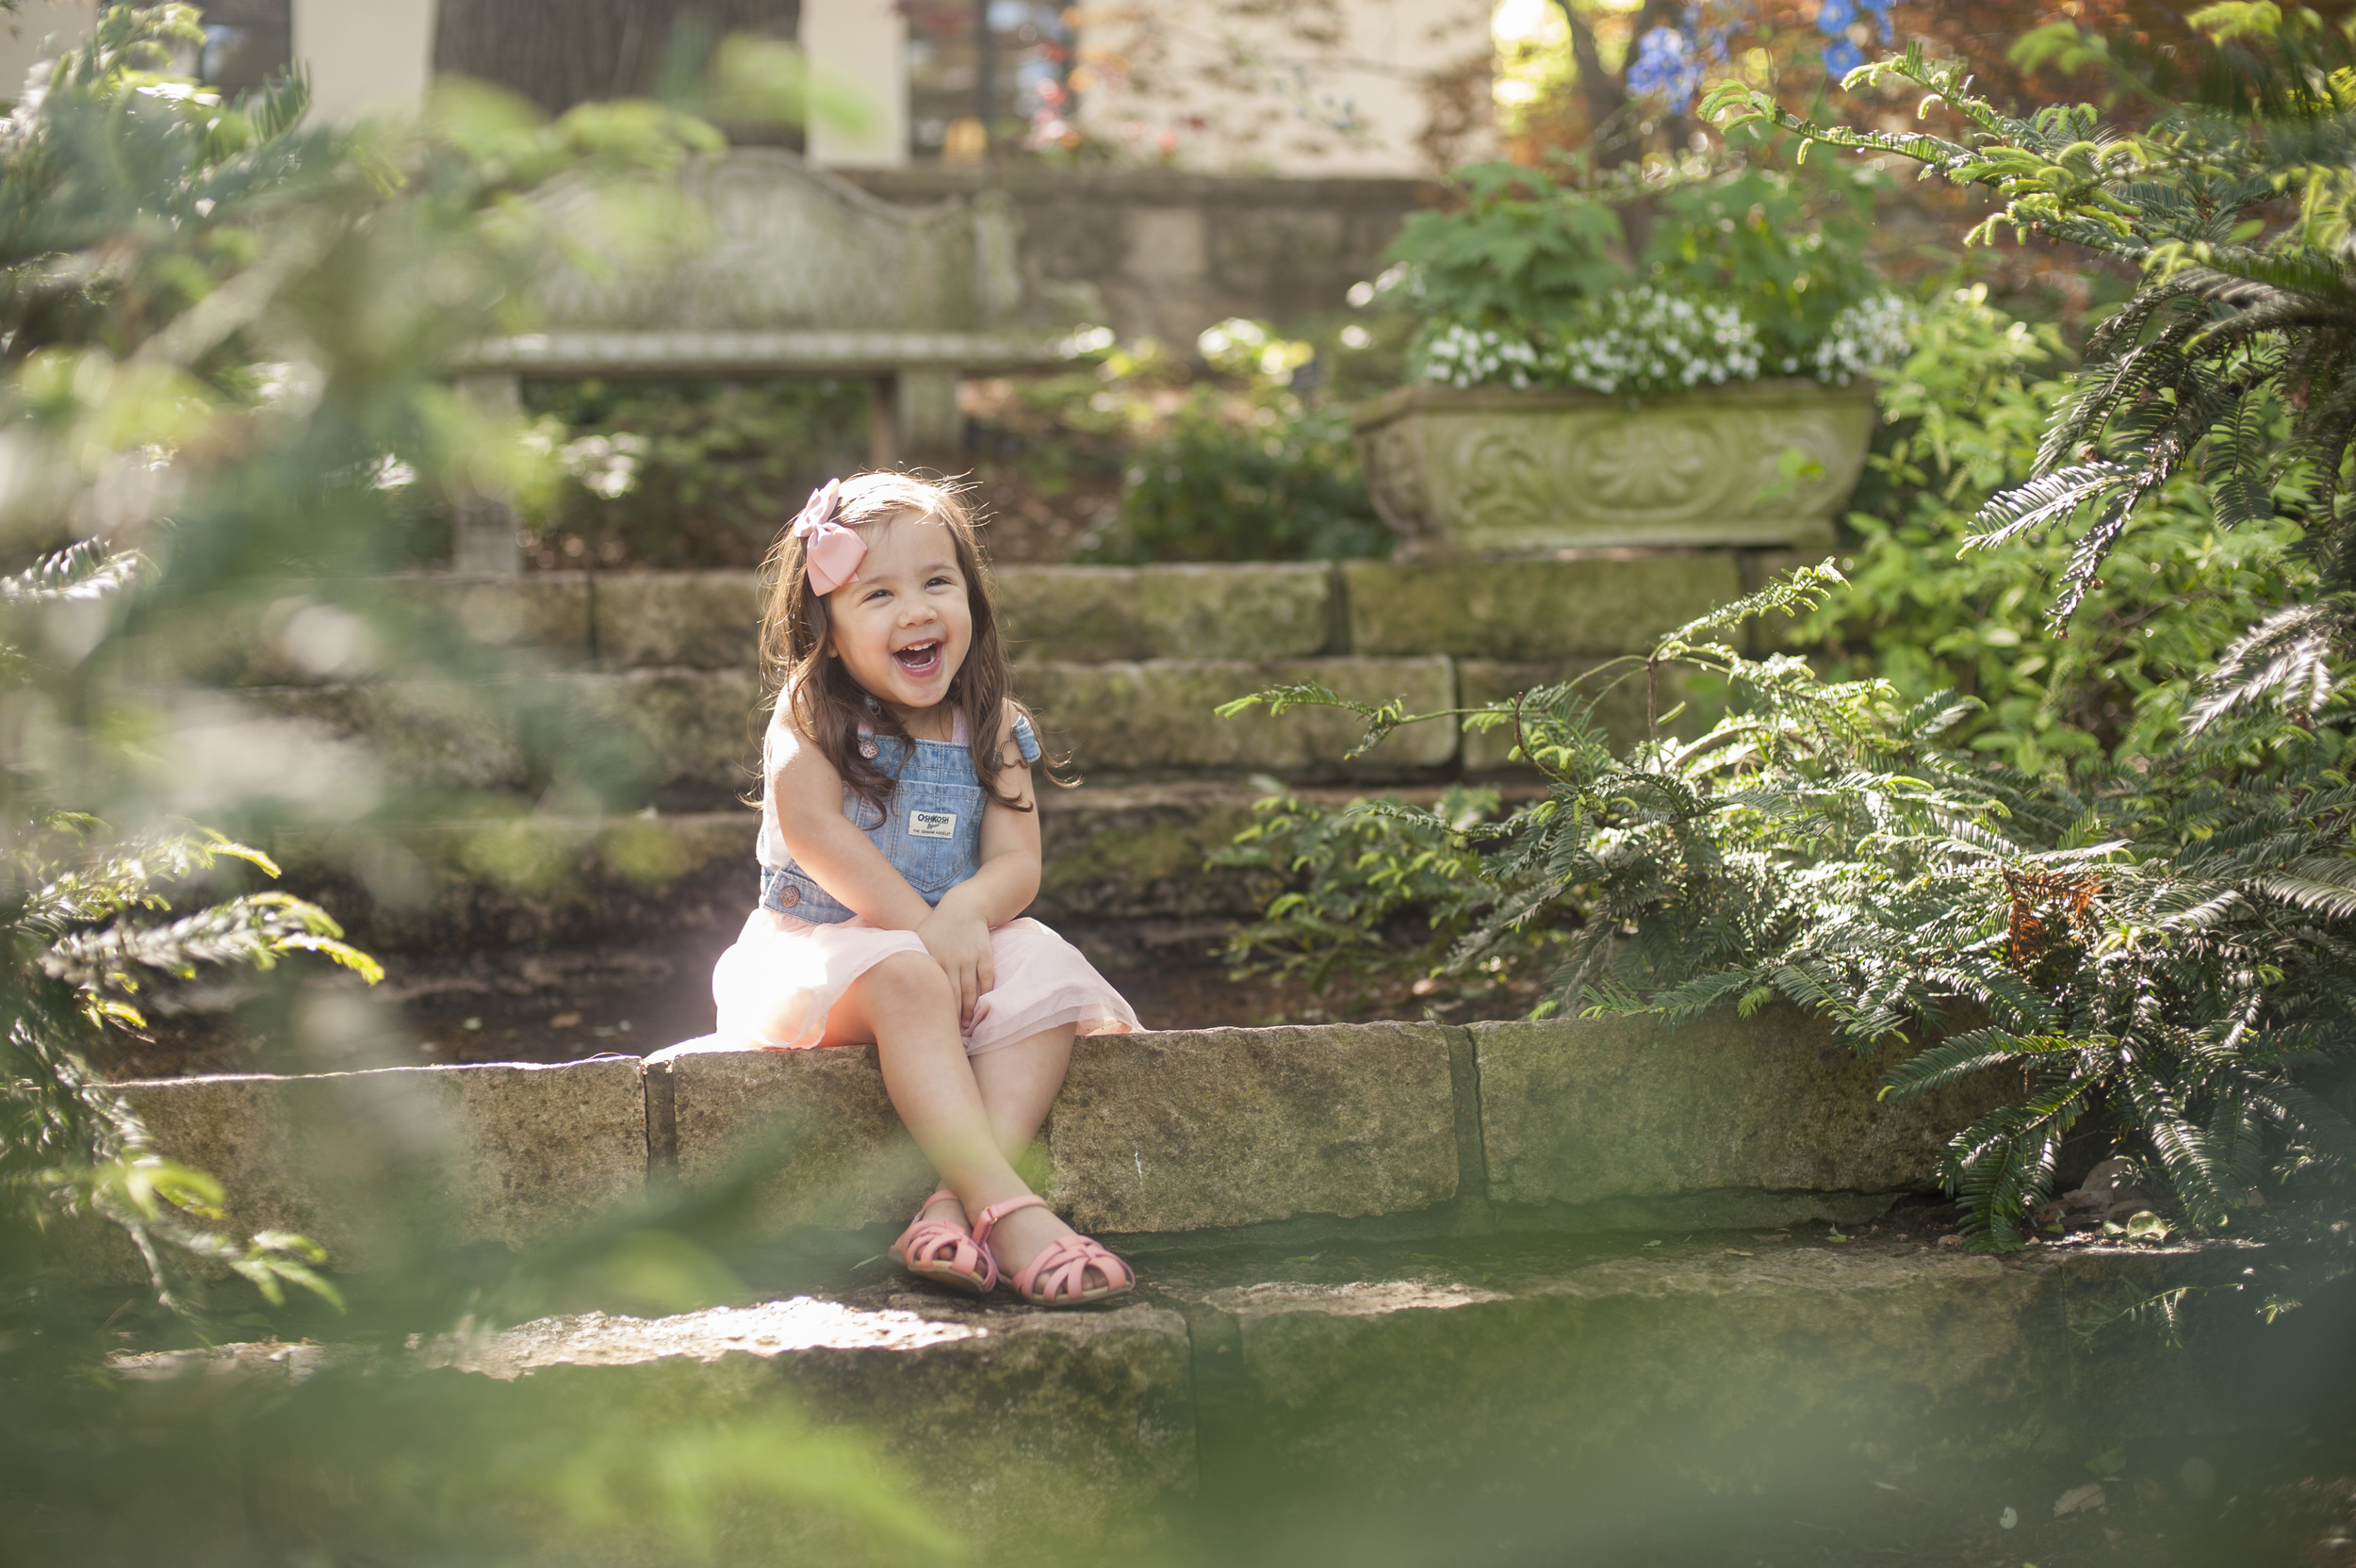 Toddler smiling amidst the greenery. Childrens portraits at the Dallas Arboretum.